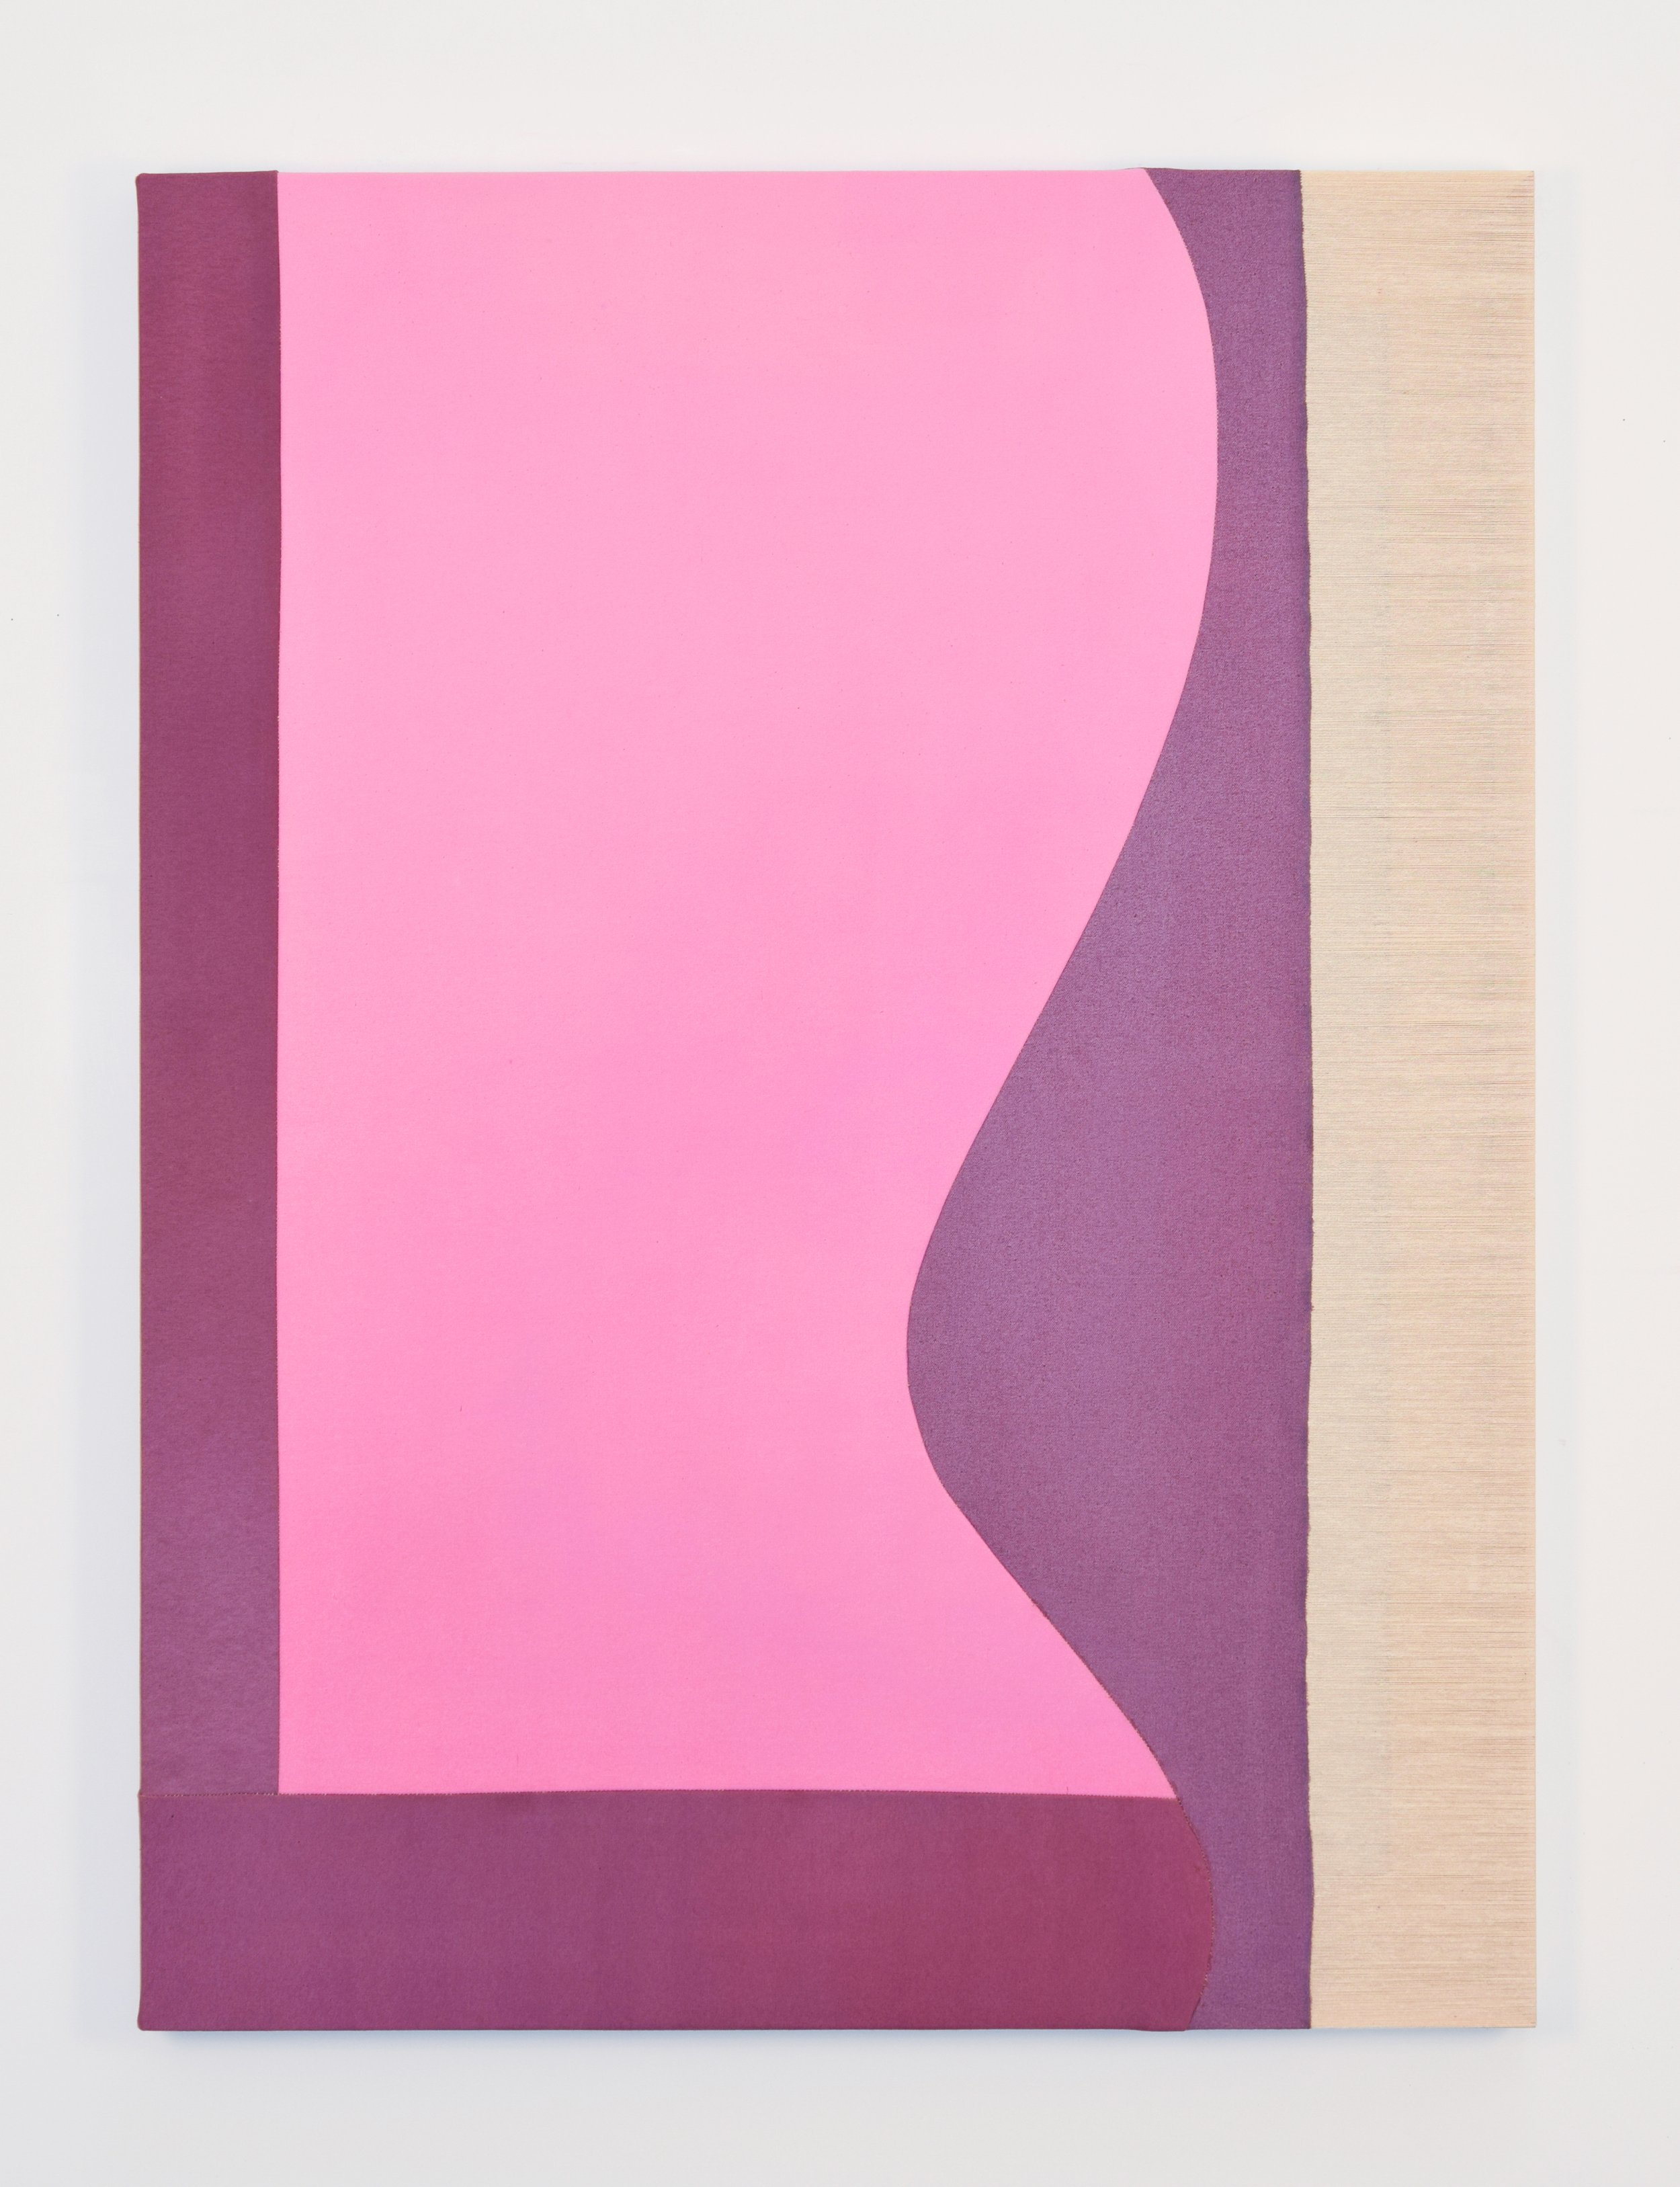   bend (mauve and pink)  2023 acrylic and dye on stitched canvas 40 x 30 in 